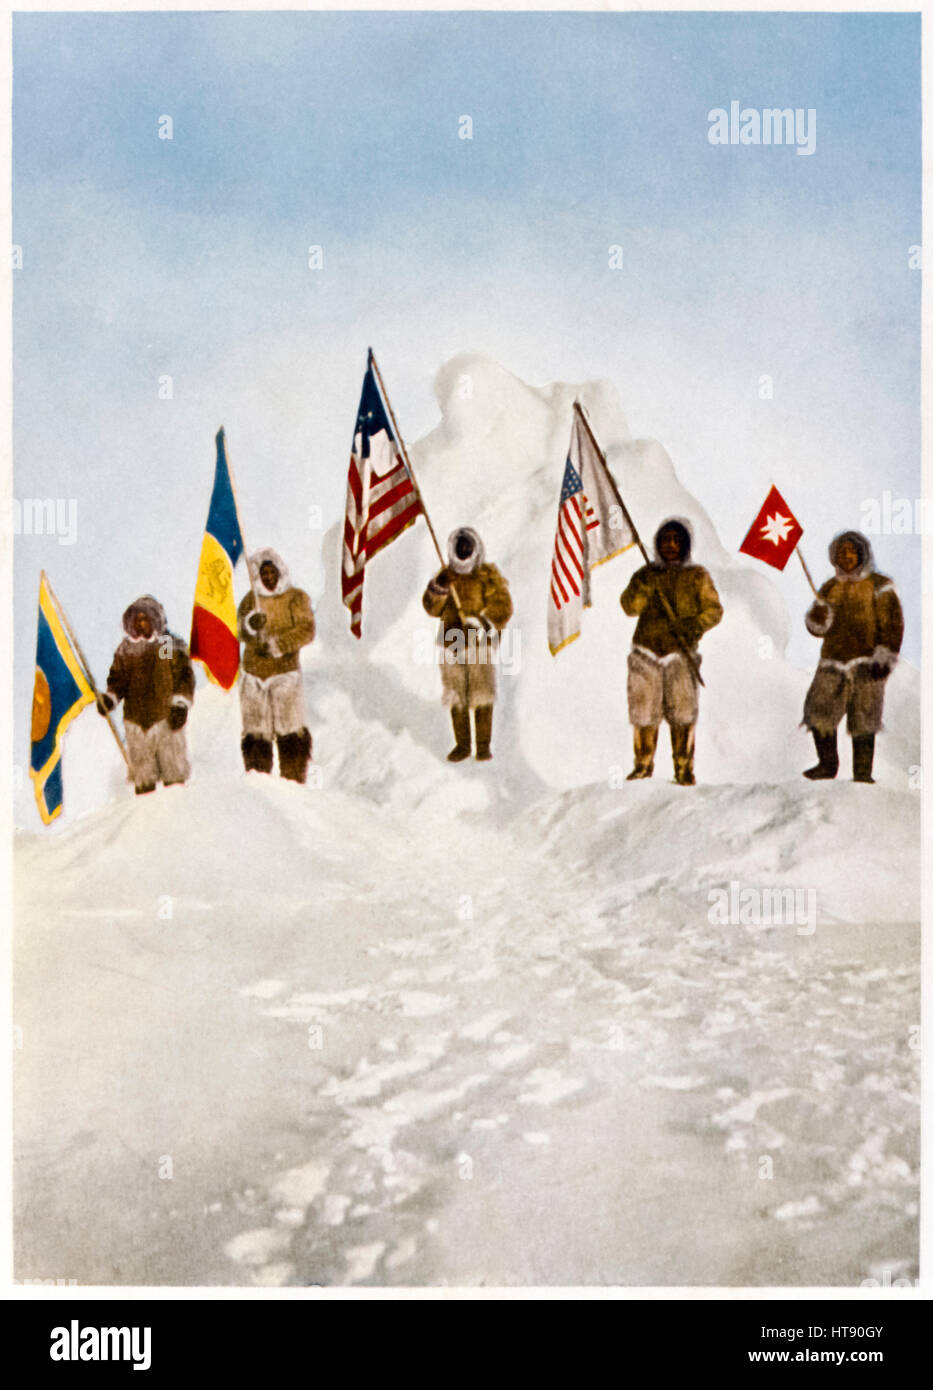 ‘The Five Flags at the Pole’ colorized photograph taken by American explorer Robert Peary (1856-1920) at what he believed to be the North Pole on 6th April 1909. Featuring Peary’s 5 assistants American Matthew Henson, and Inuits Ootah, Egigingwah, Seegloo and Ooqueah. Stock Photo